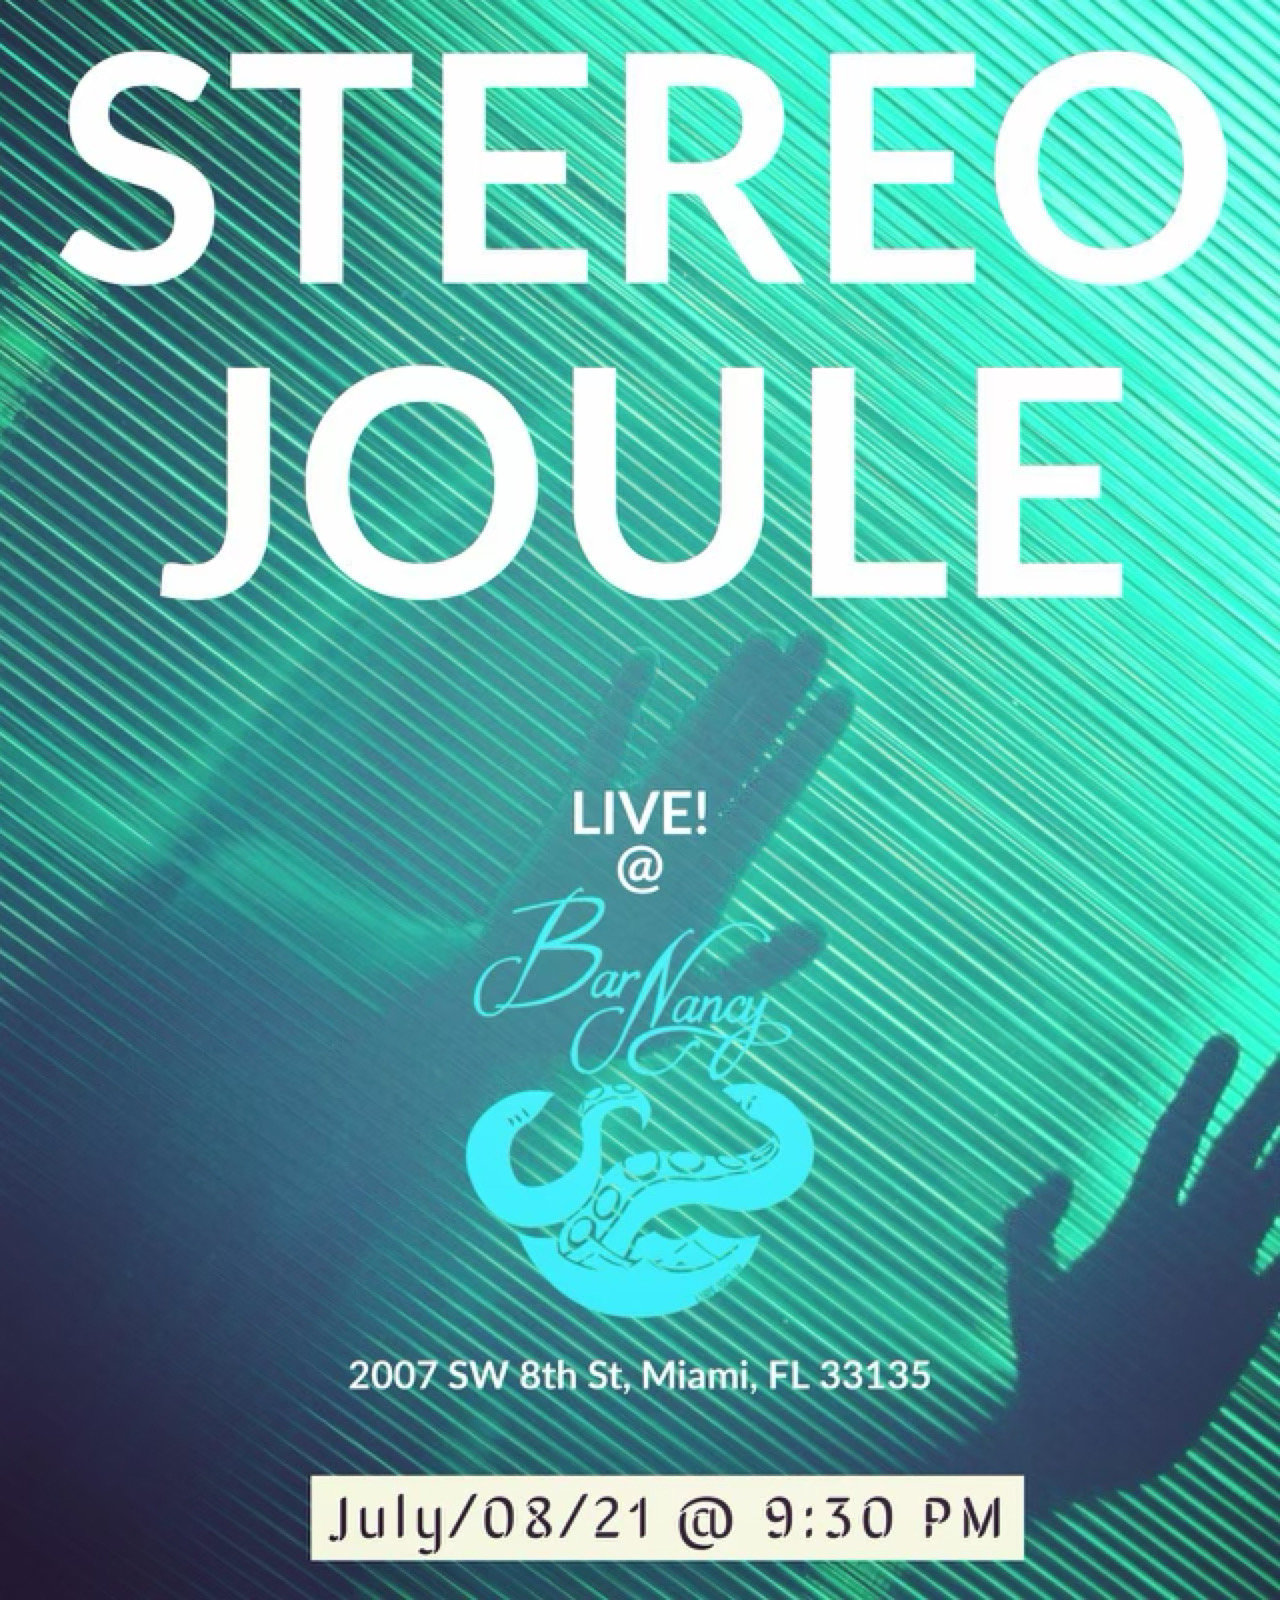 Stereo Joule at Bar Nancy July 8th @ 9:30PM